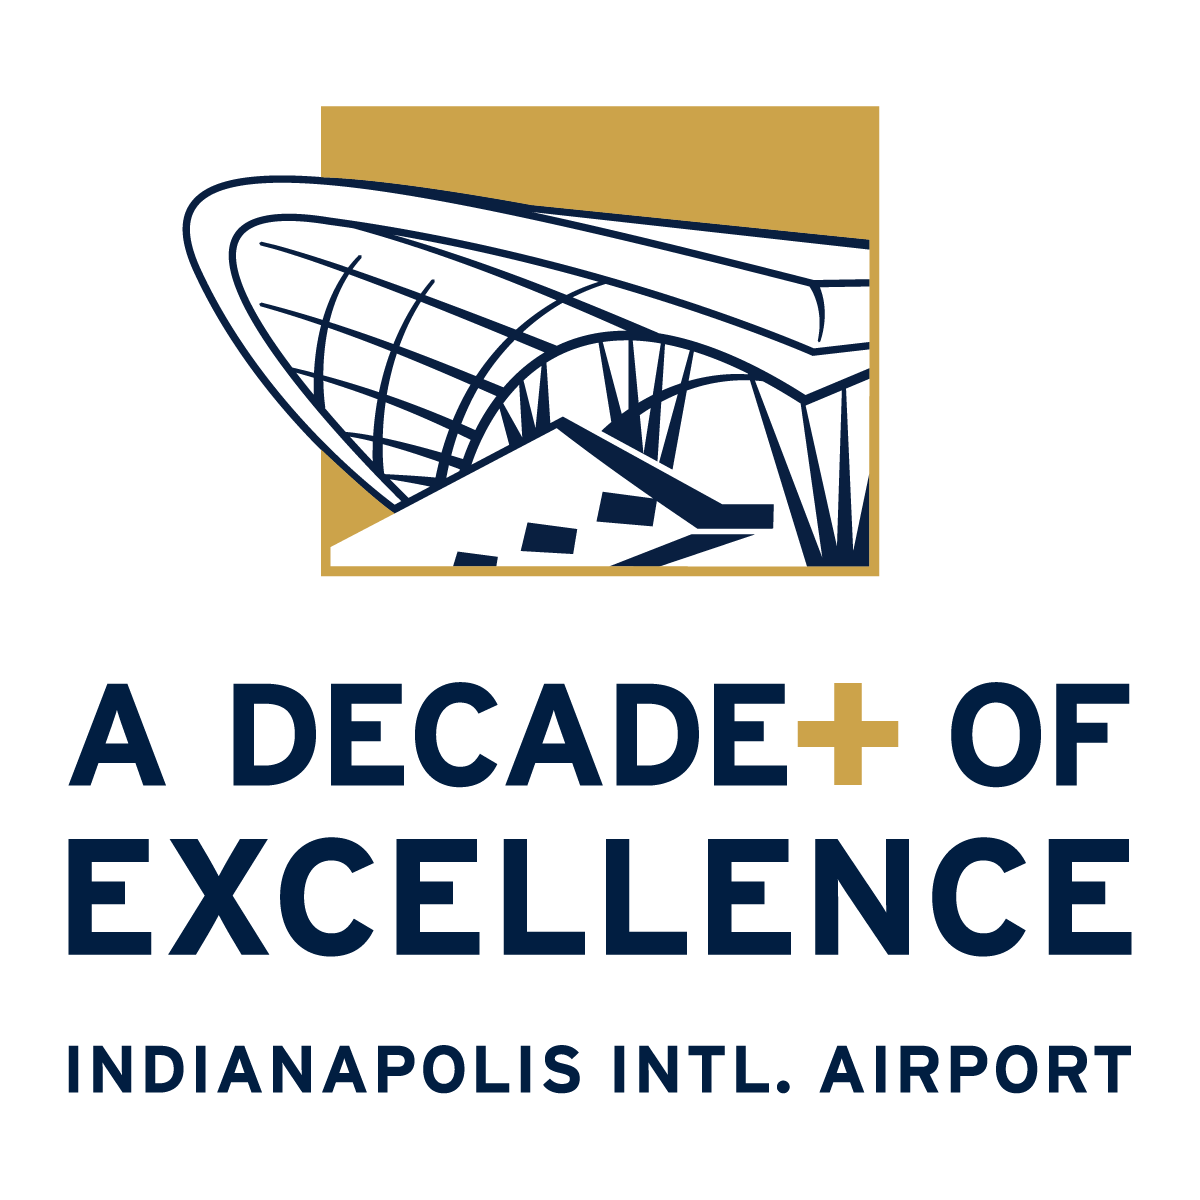 I. Indianapolis Airport Authority (Tier 3)